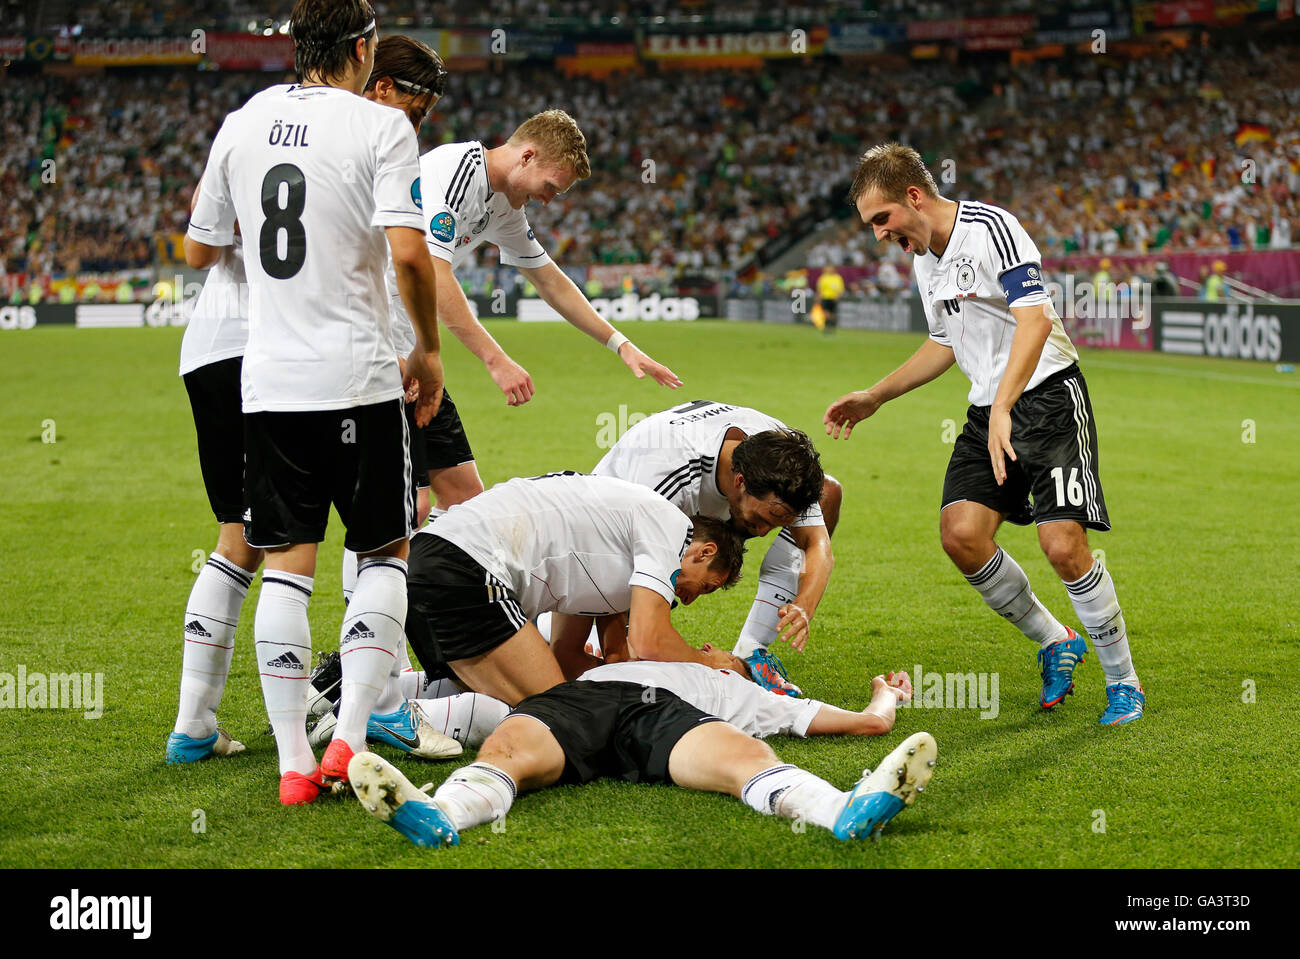 Players of Germany national football team celebrate their winning after the UEFA EURO 2012 game against Denmark at Lviv Arena Stock Photo